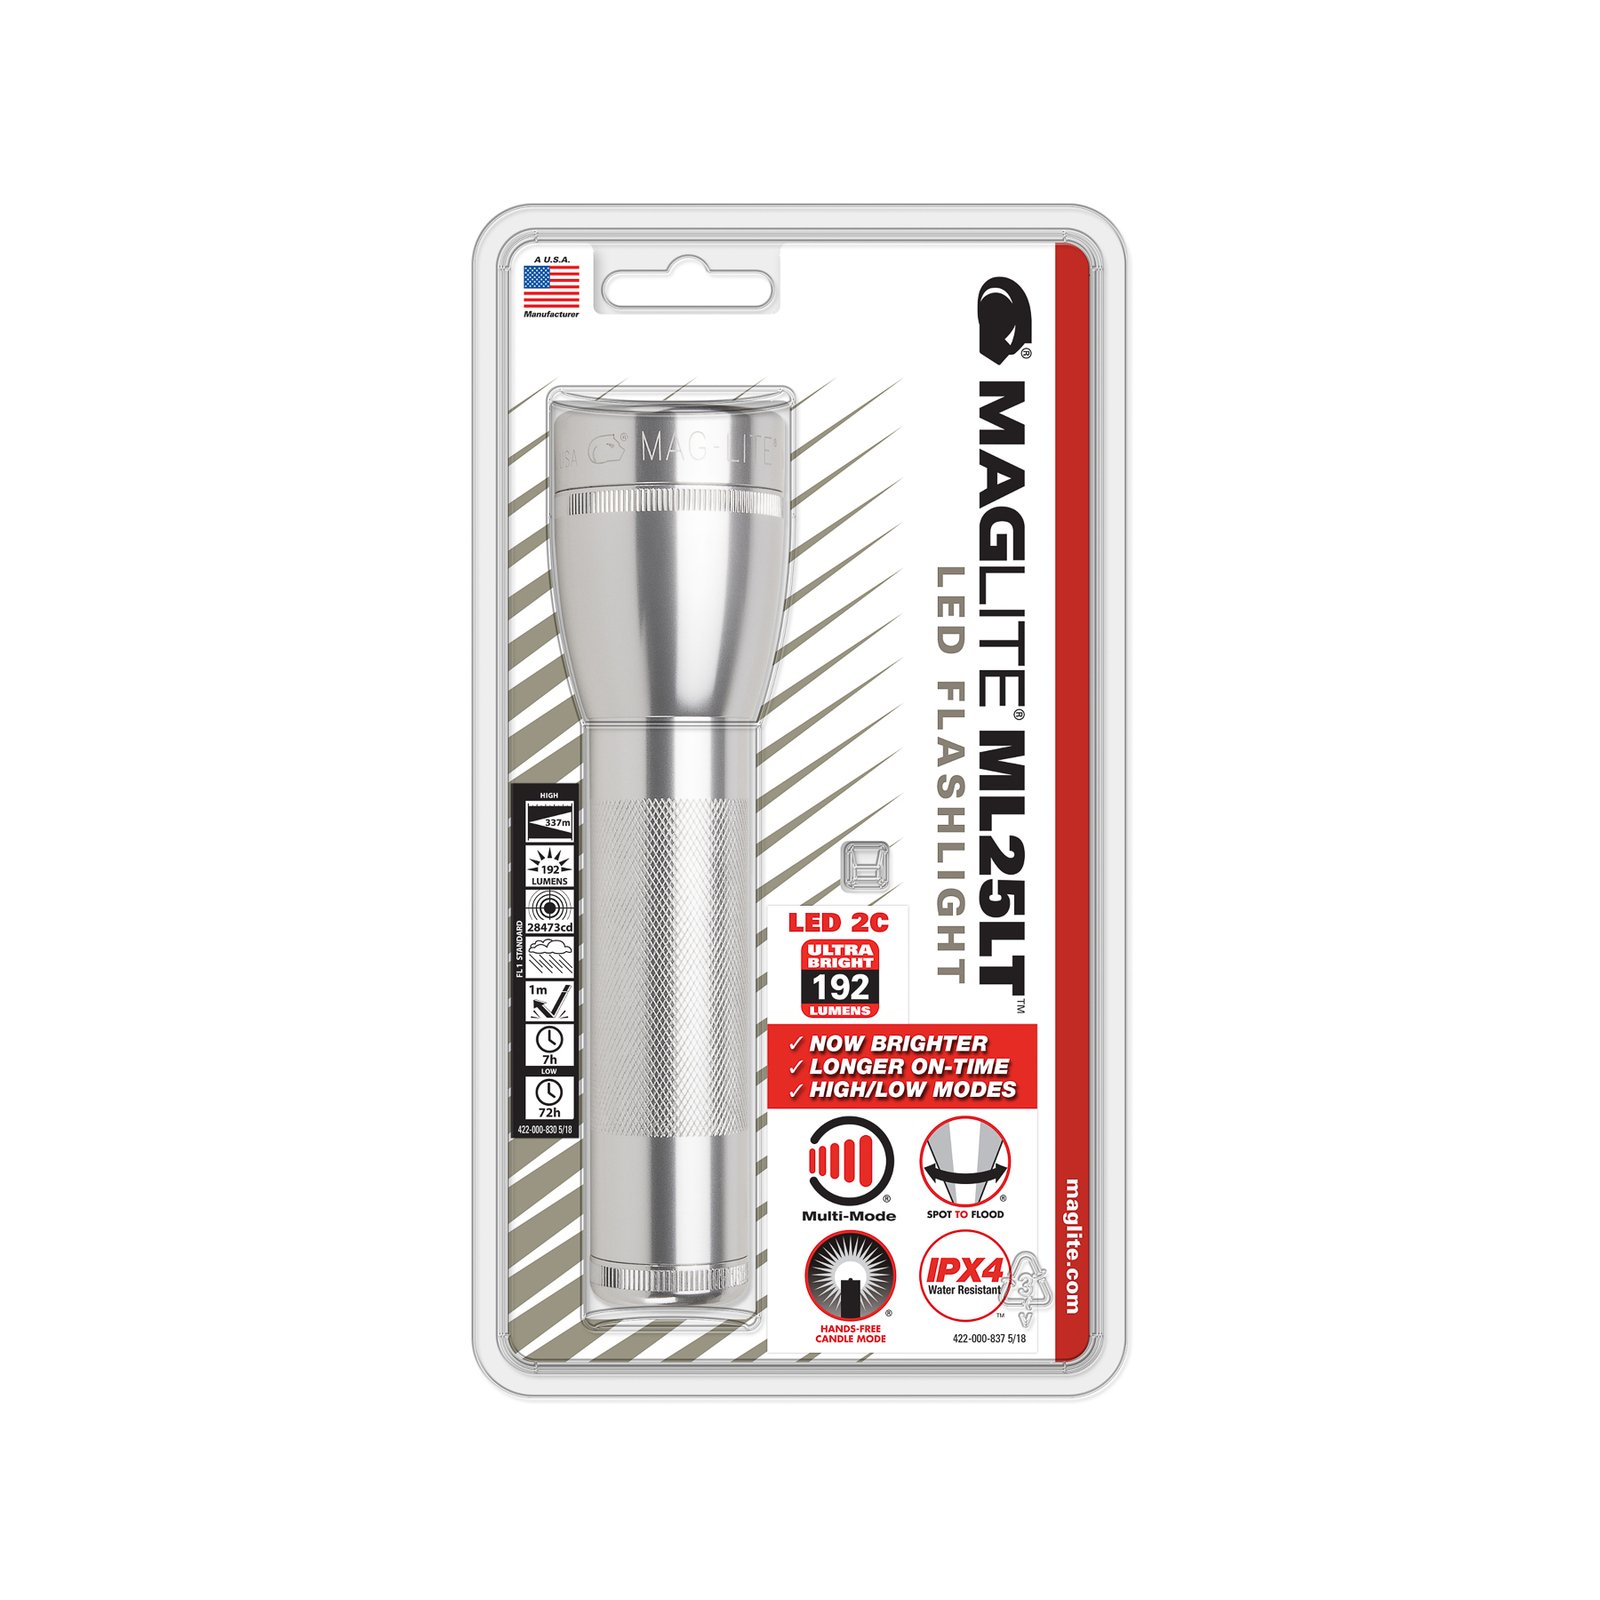 Maglite LED-ficklampa ML25LT, 2-cell C, silver